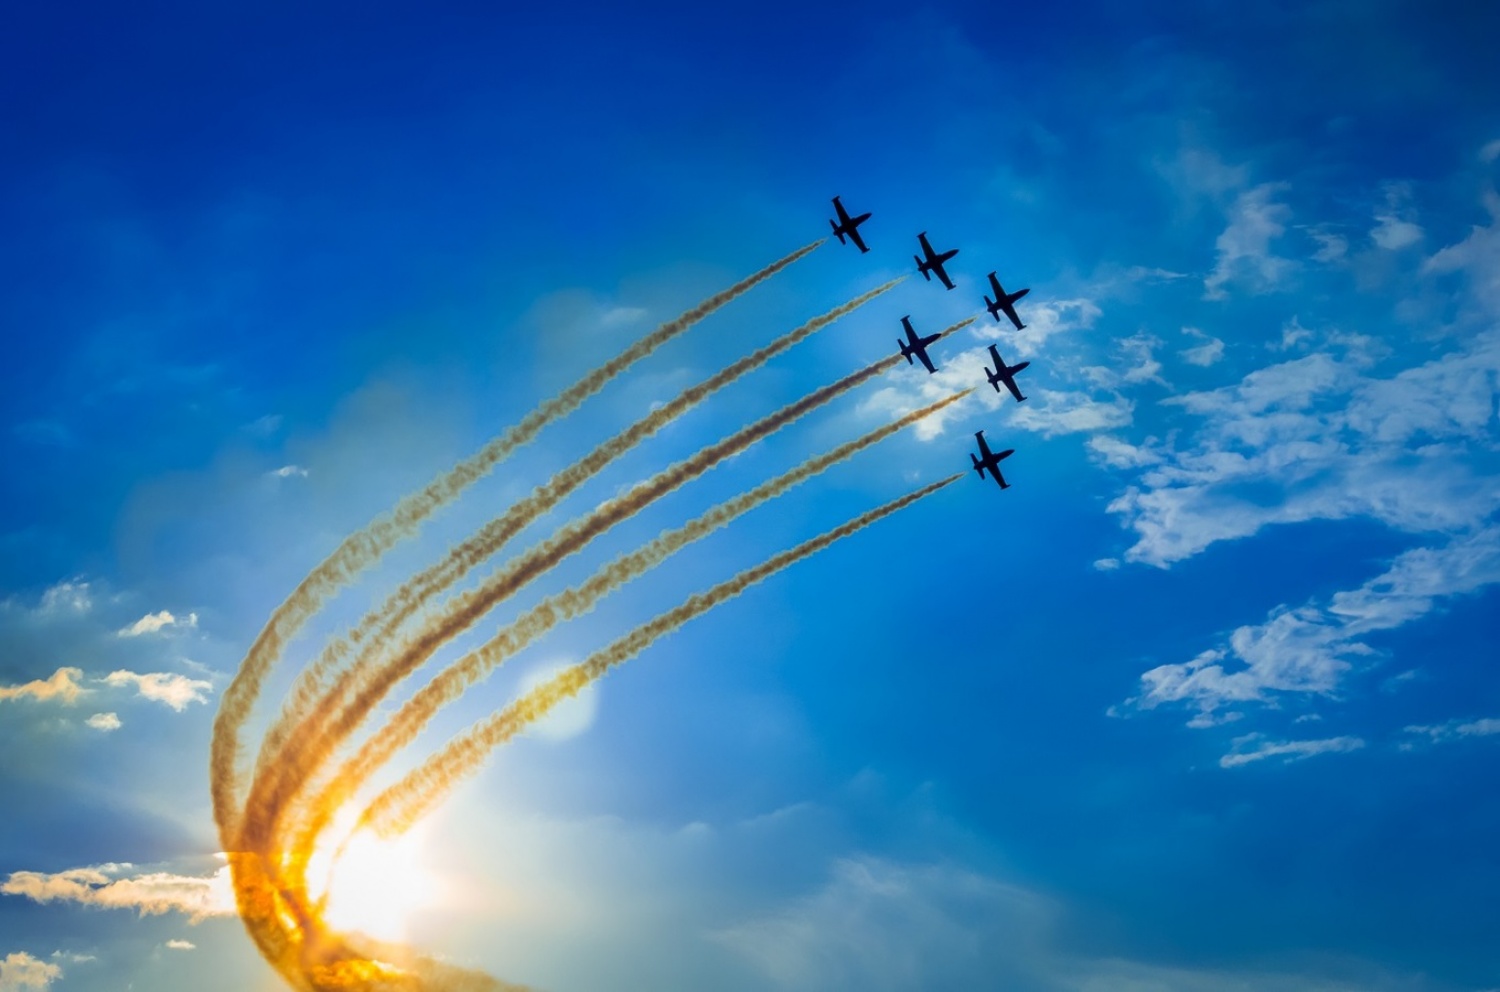 THE PACIFIC AIR SHOW - GOLD COAST IN 2023